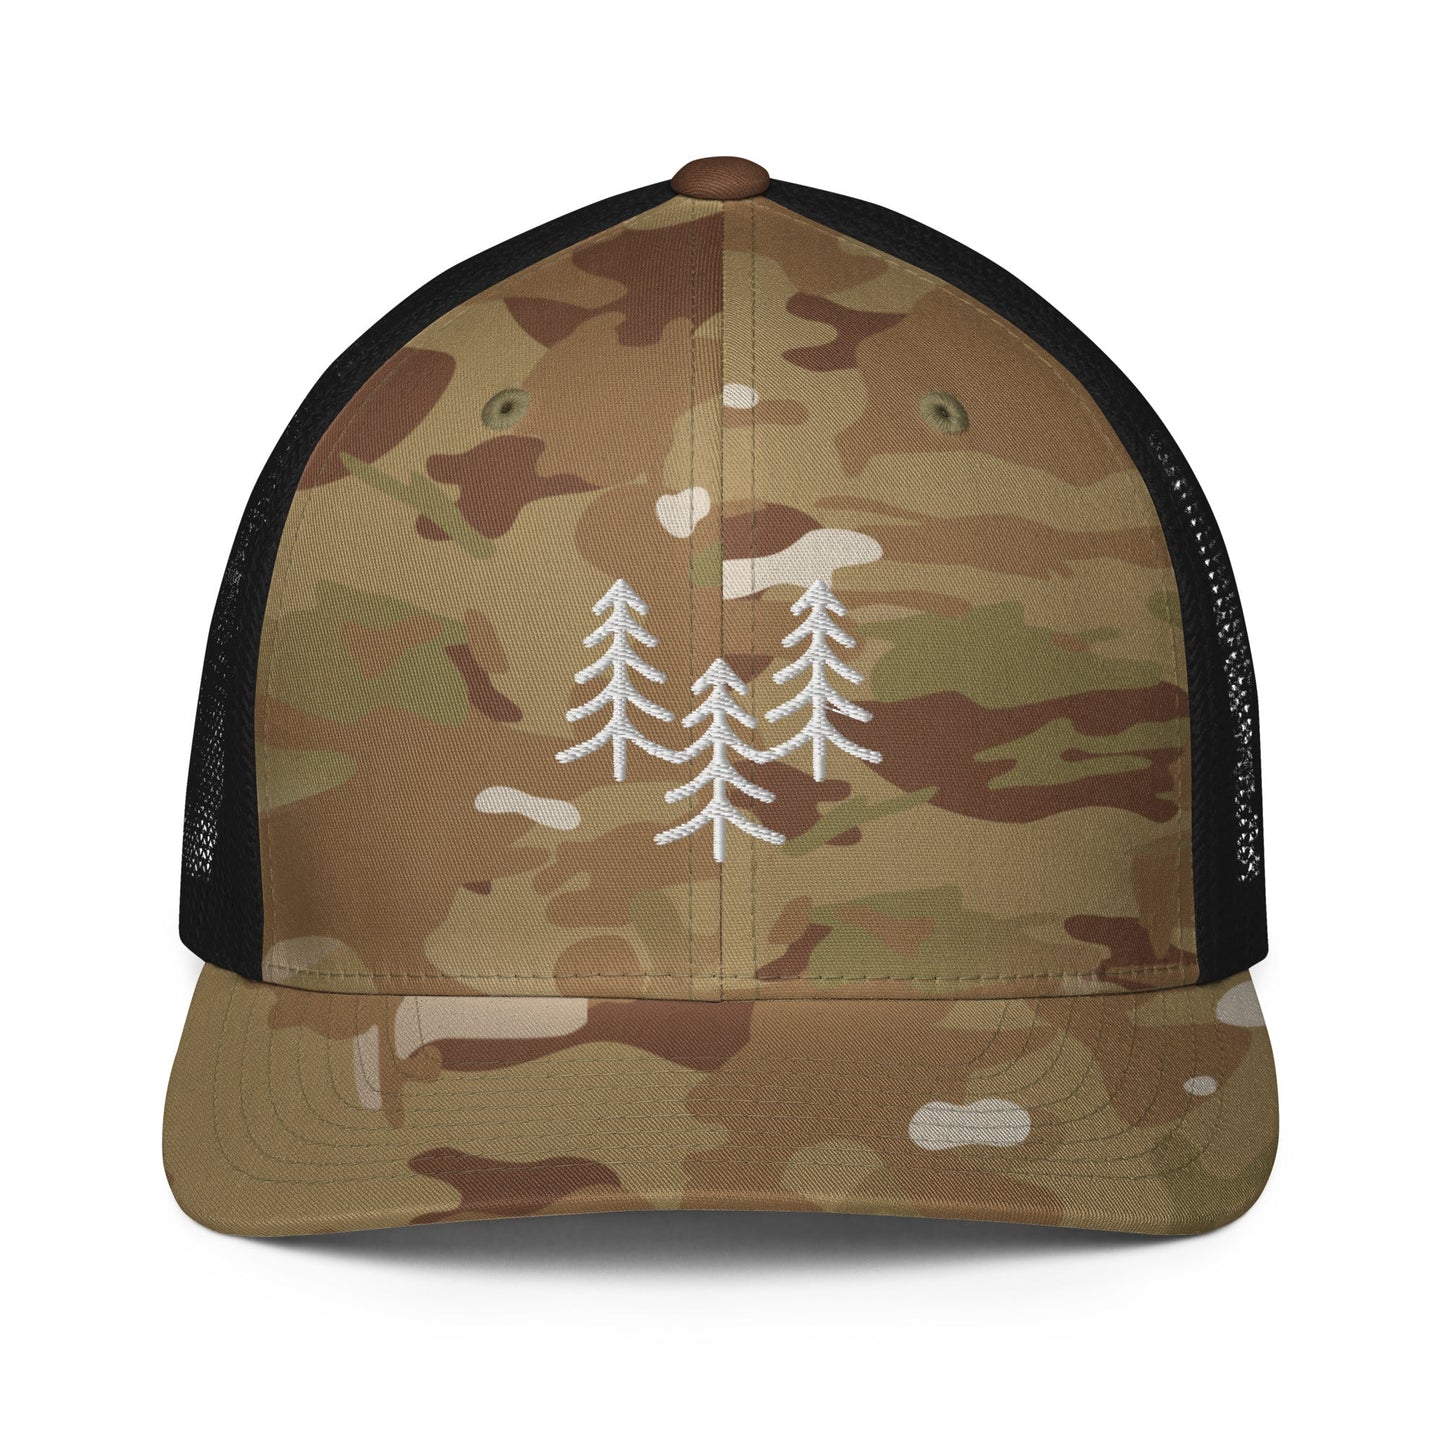 Puff Trees Embroidered Closed-back trucker cap - Appalachian Bittersweet - mesh back